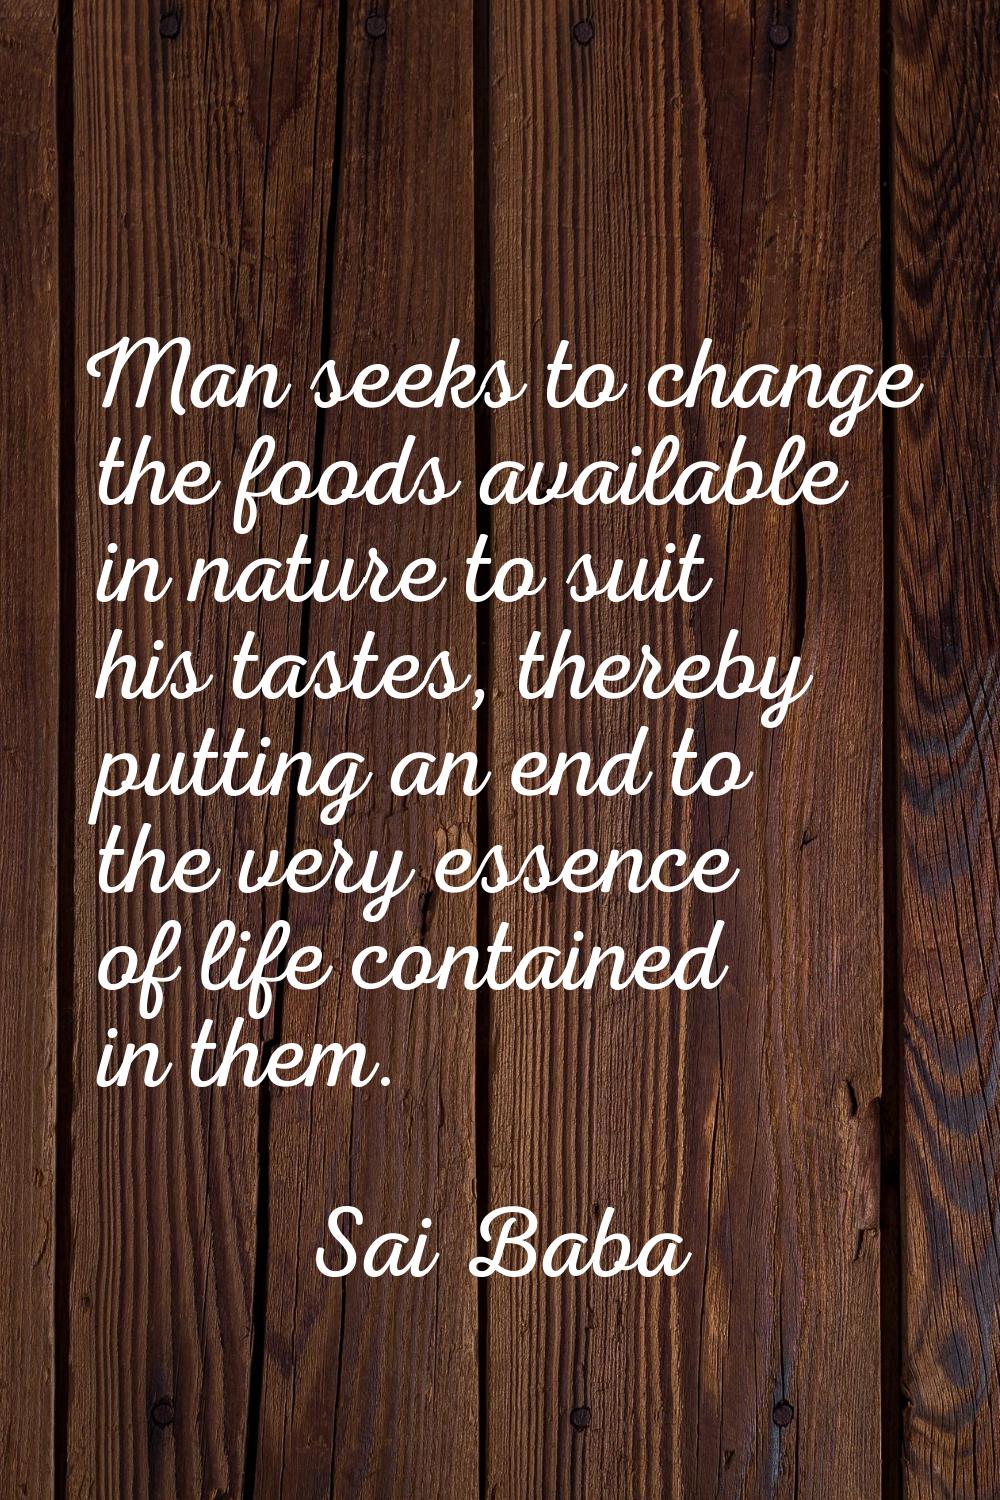 Man seeks to change the foods available in nature to suit his tastes, thereby putting an end to the